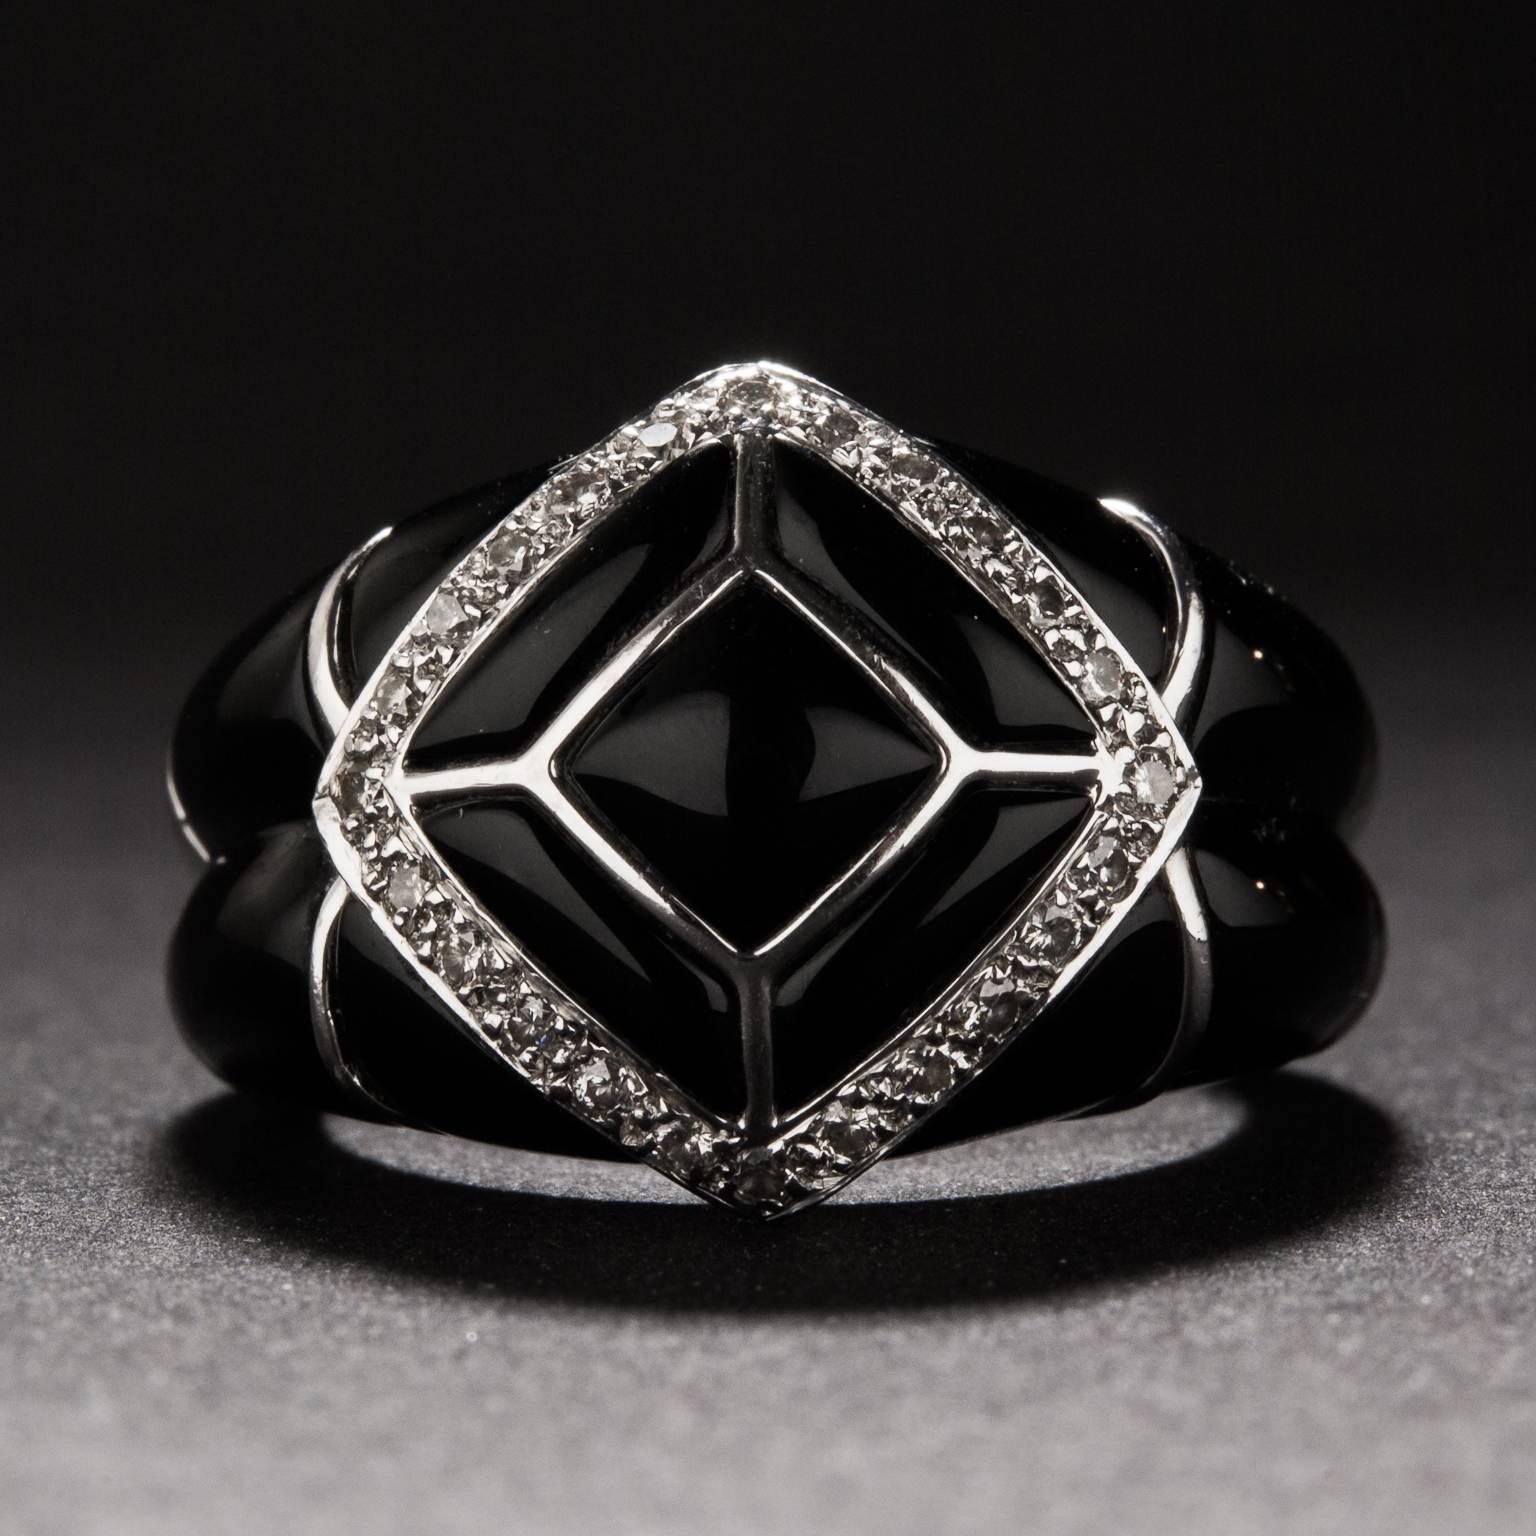 This striking onyx ring was crafted circa 1970. It features .20 total carats of diamonds and it constructed in platinum.